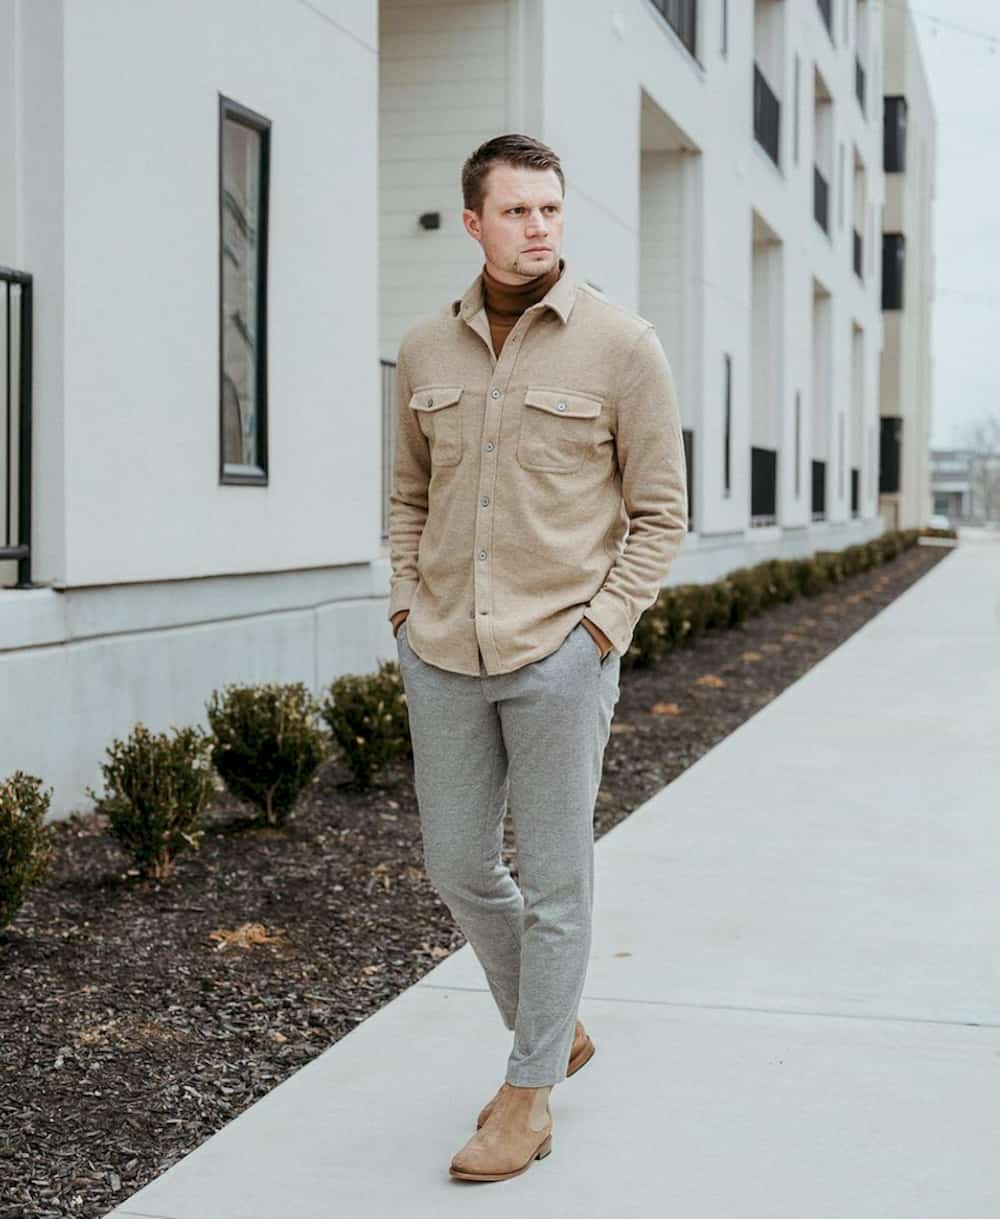 What Color Shoes to Wear with Khaki Pants